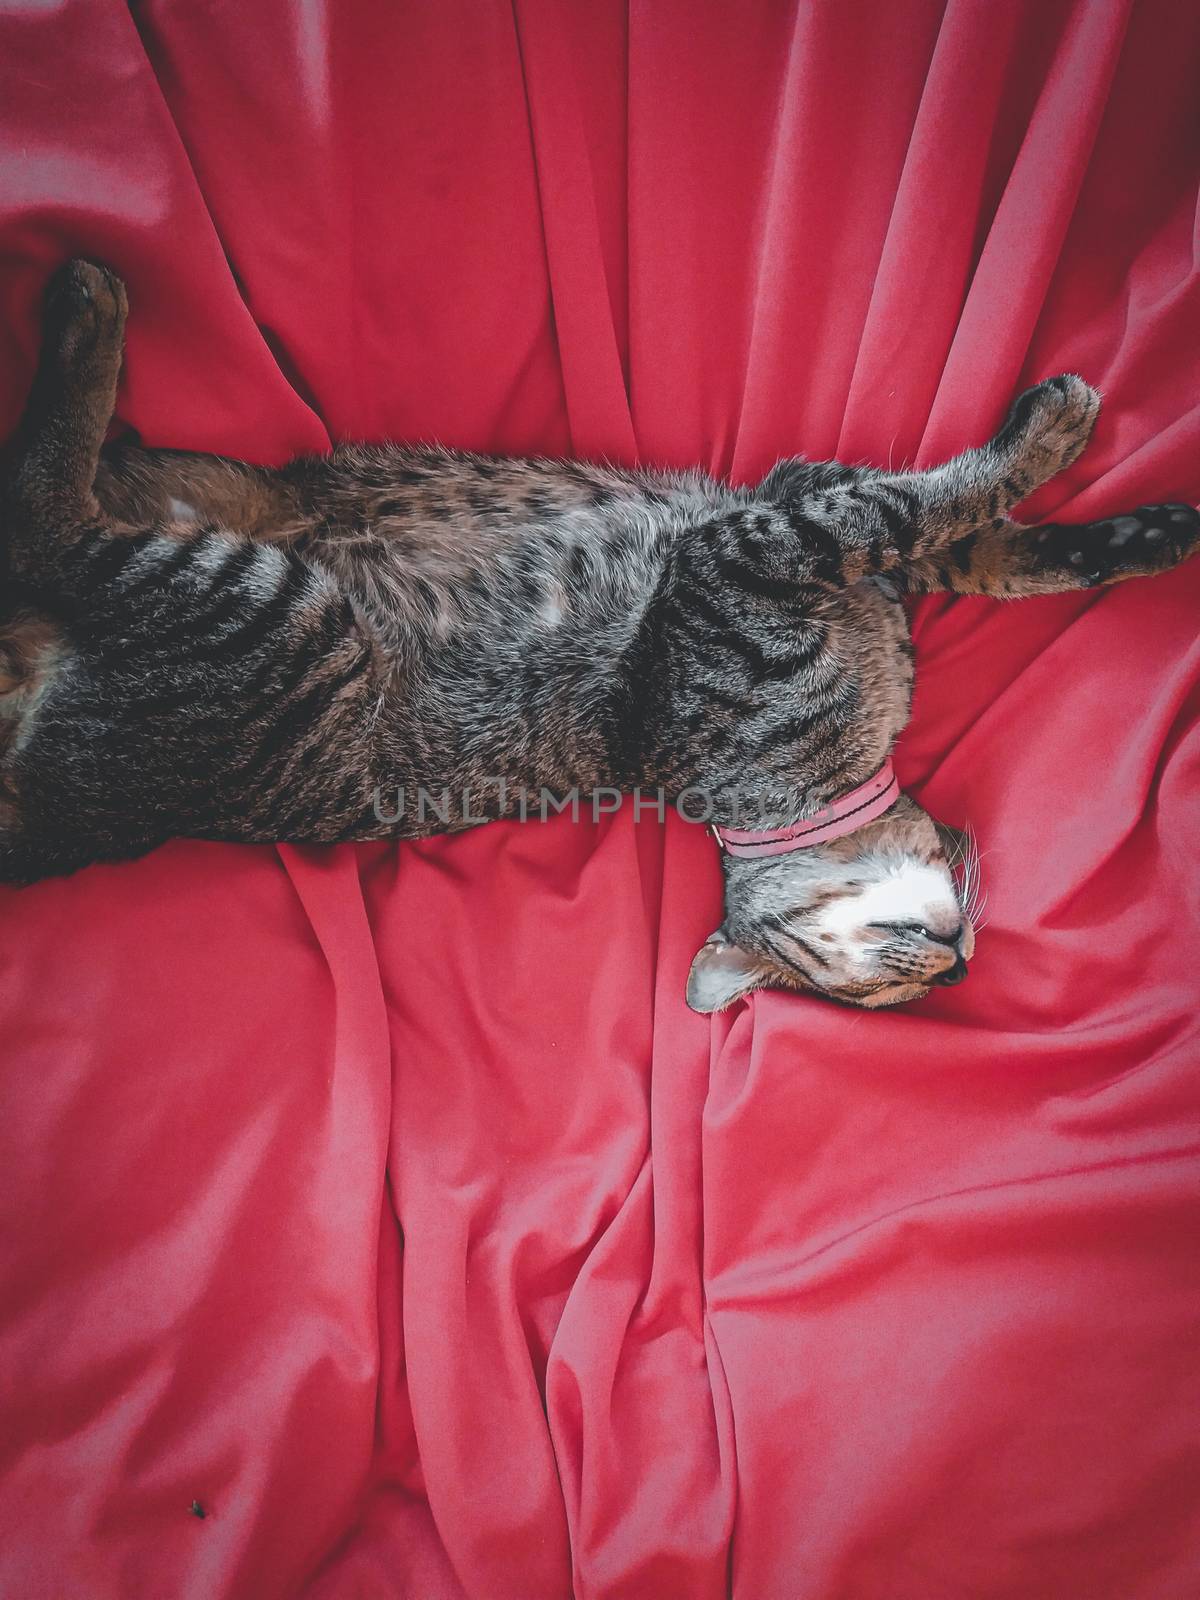 Cat sleeping on a red couch showing concept of the struggle and coping with home quarantine during the covid-19 pandemic outbreak by Sonnet15